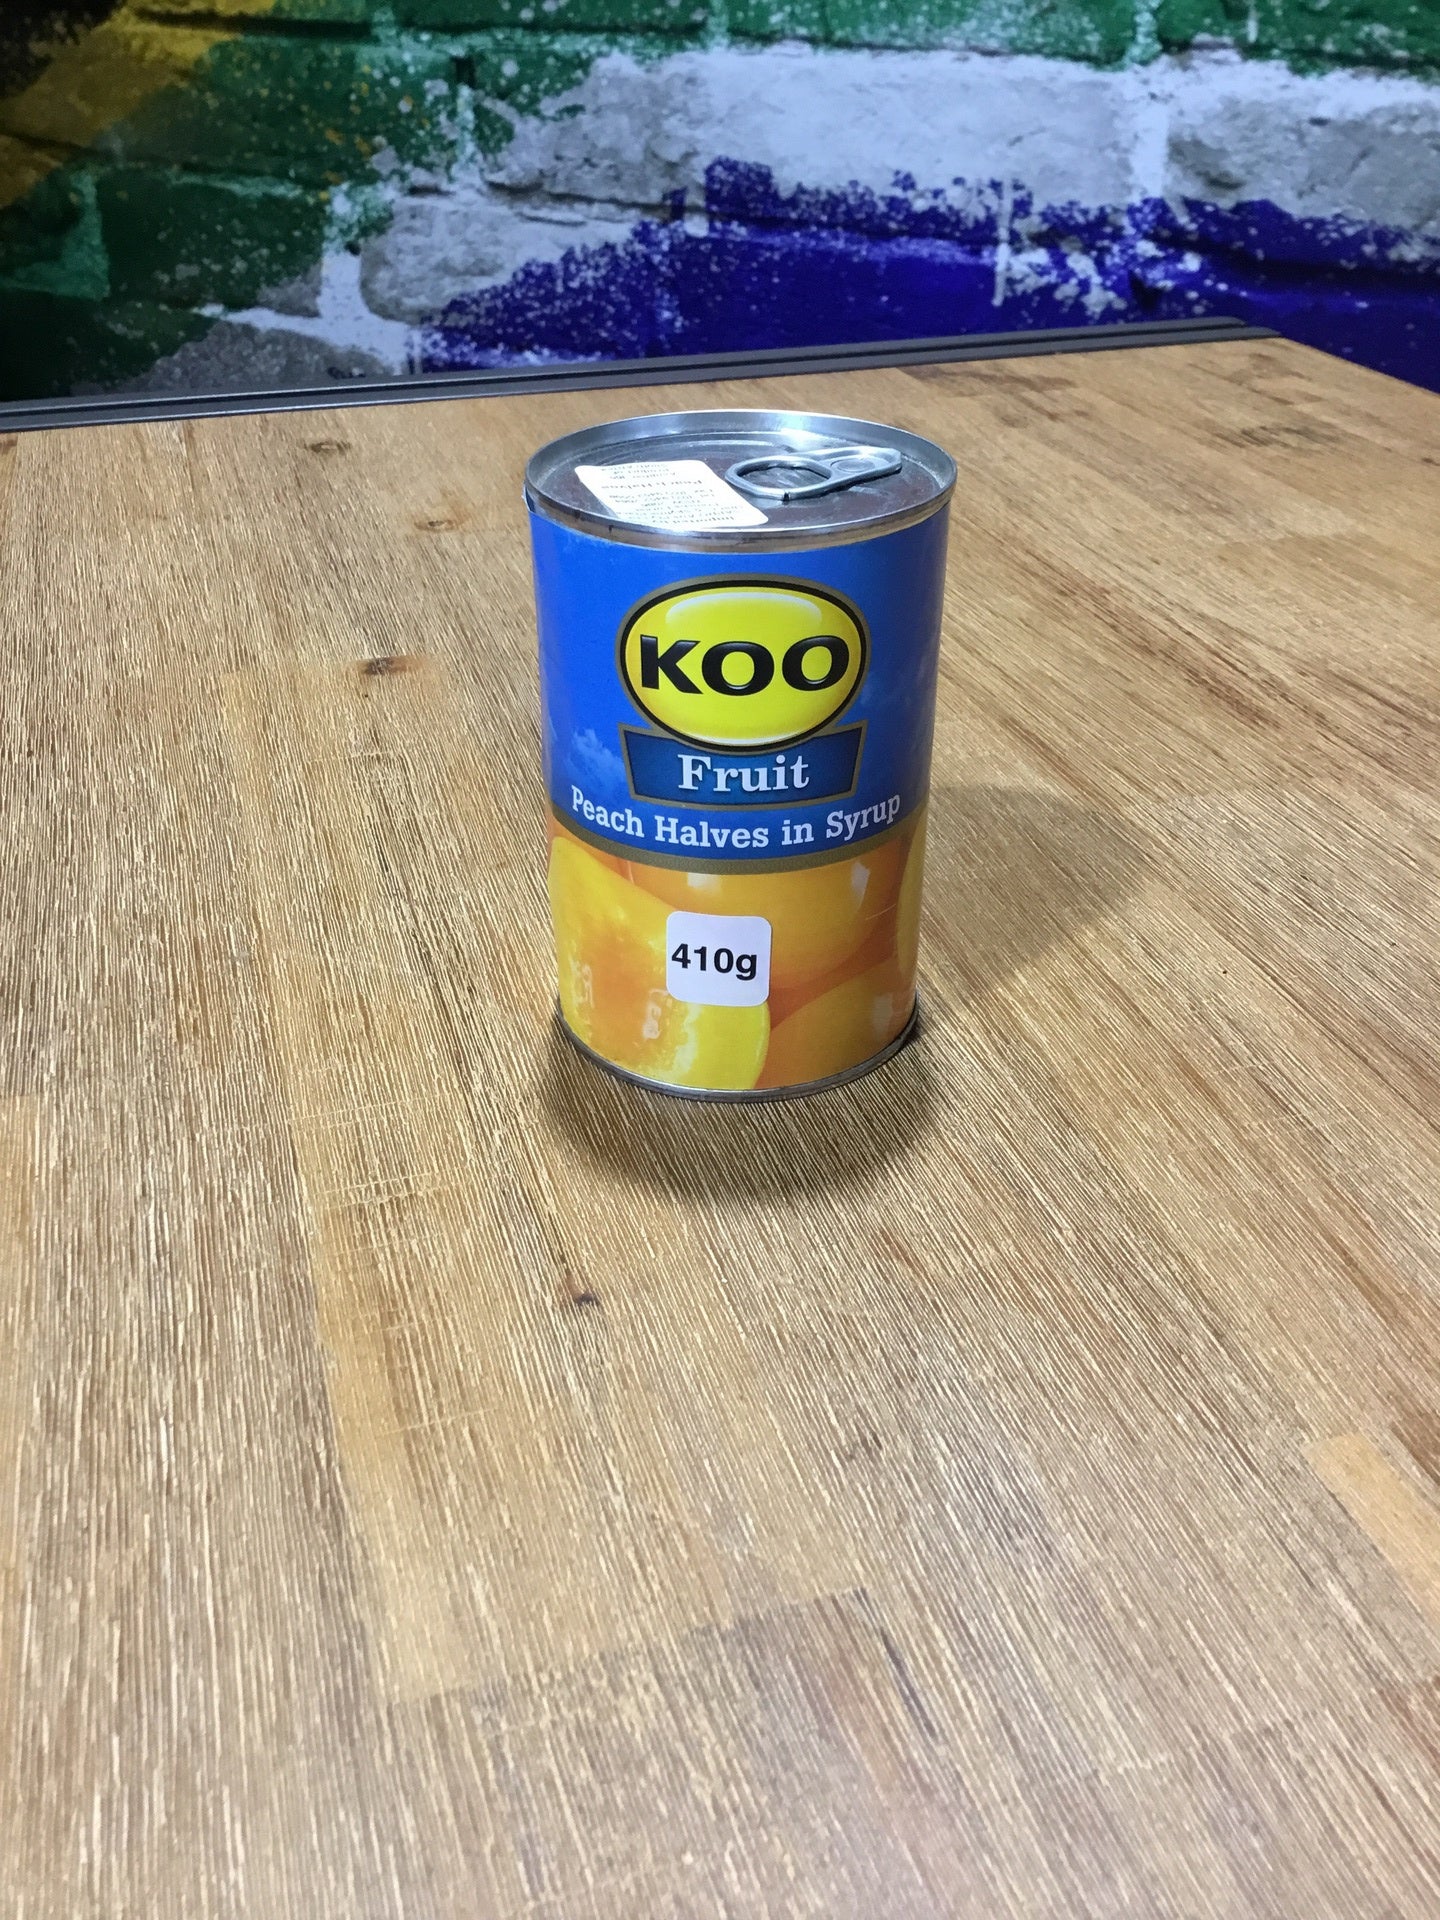 Koo Peach Halves in syrup 410g can